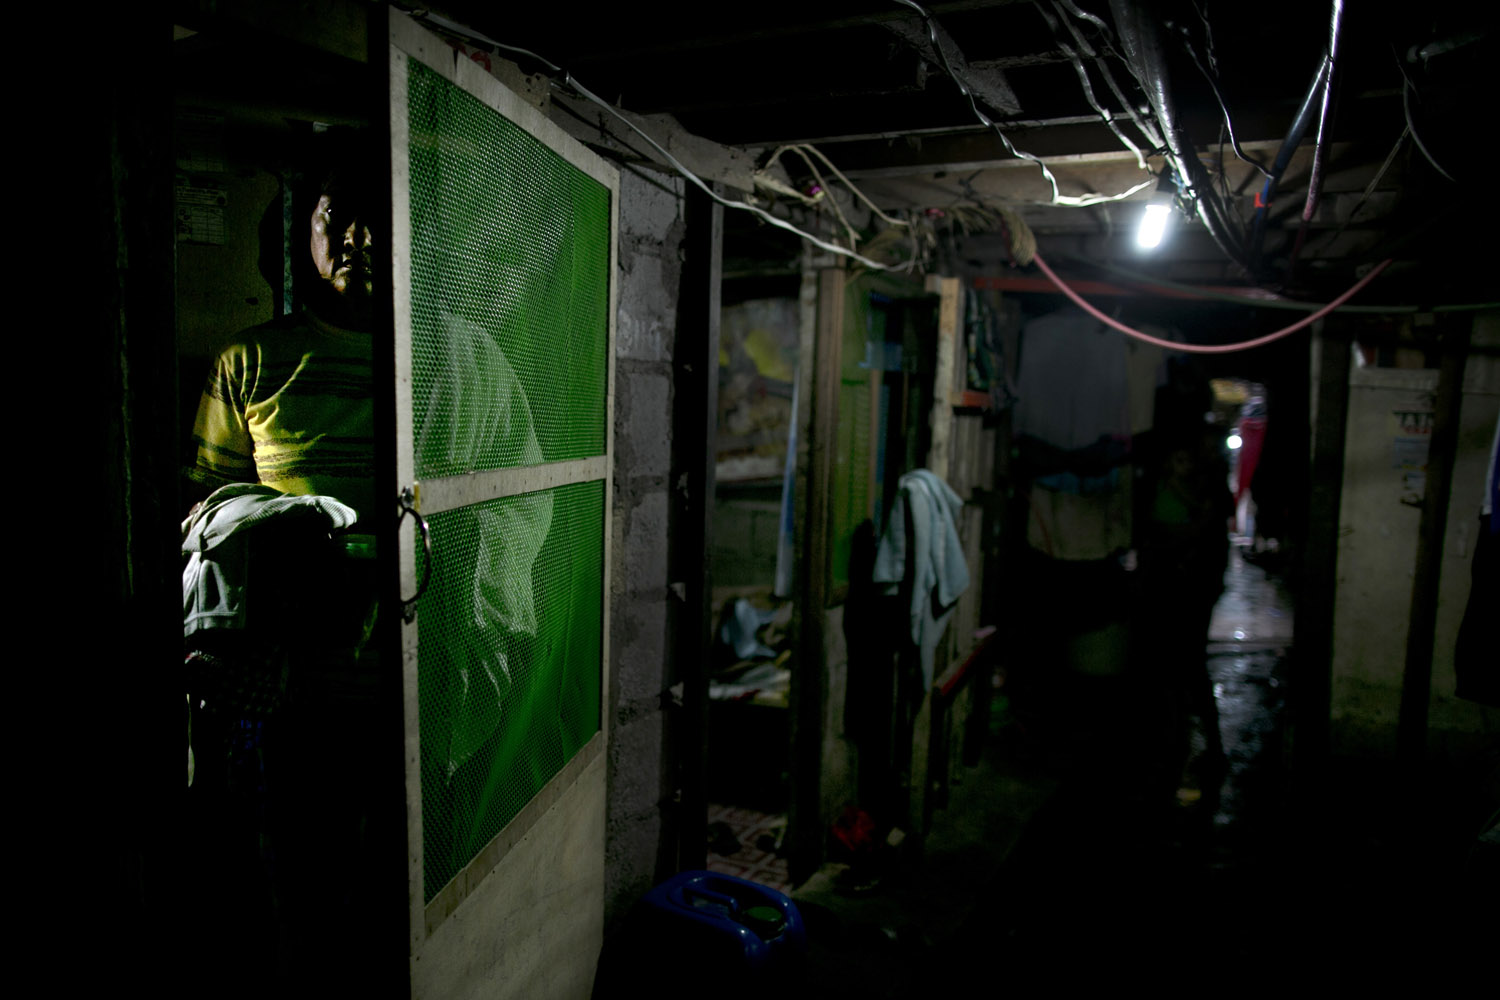 Aug. 21, 2012. A man stands next to the door of his room under a bridge in Manila. Families cram into small rooms under a bridge so they can live for free.